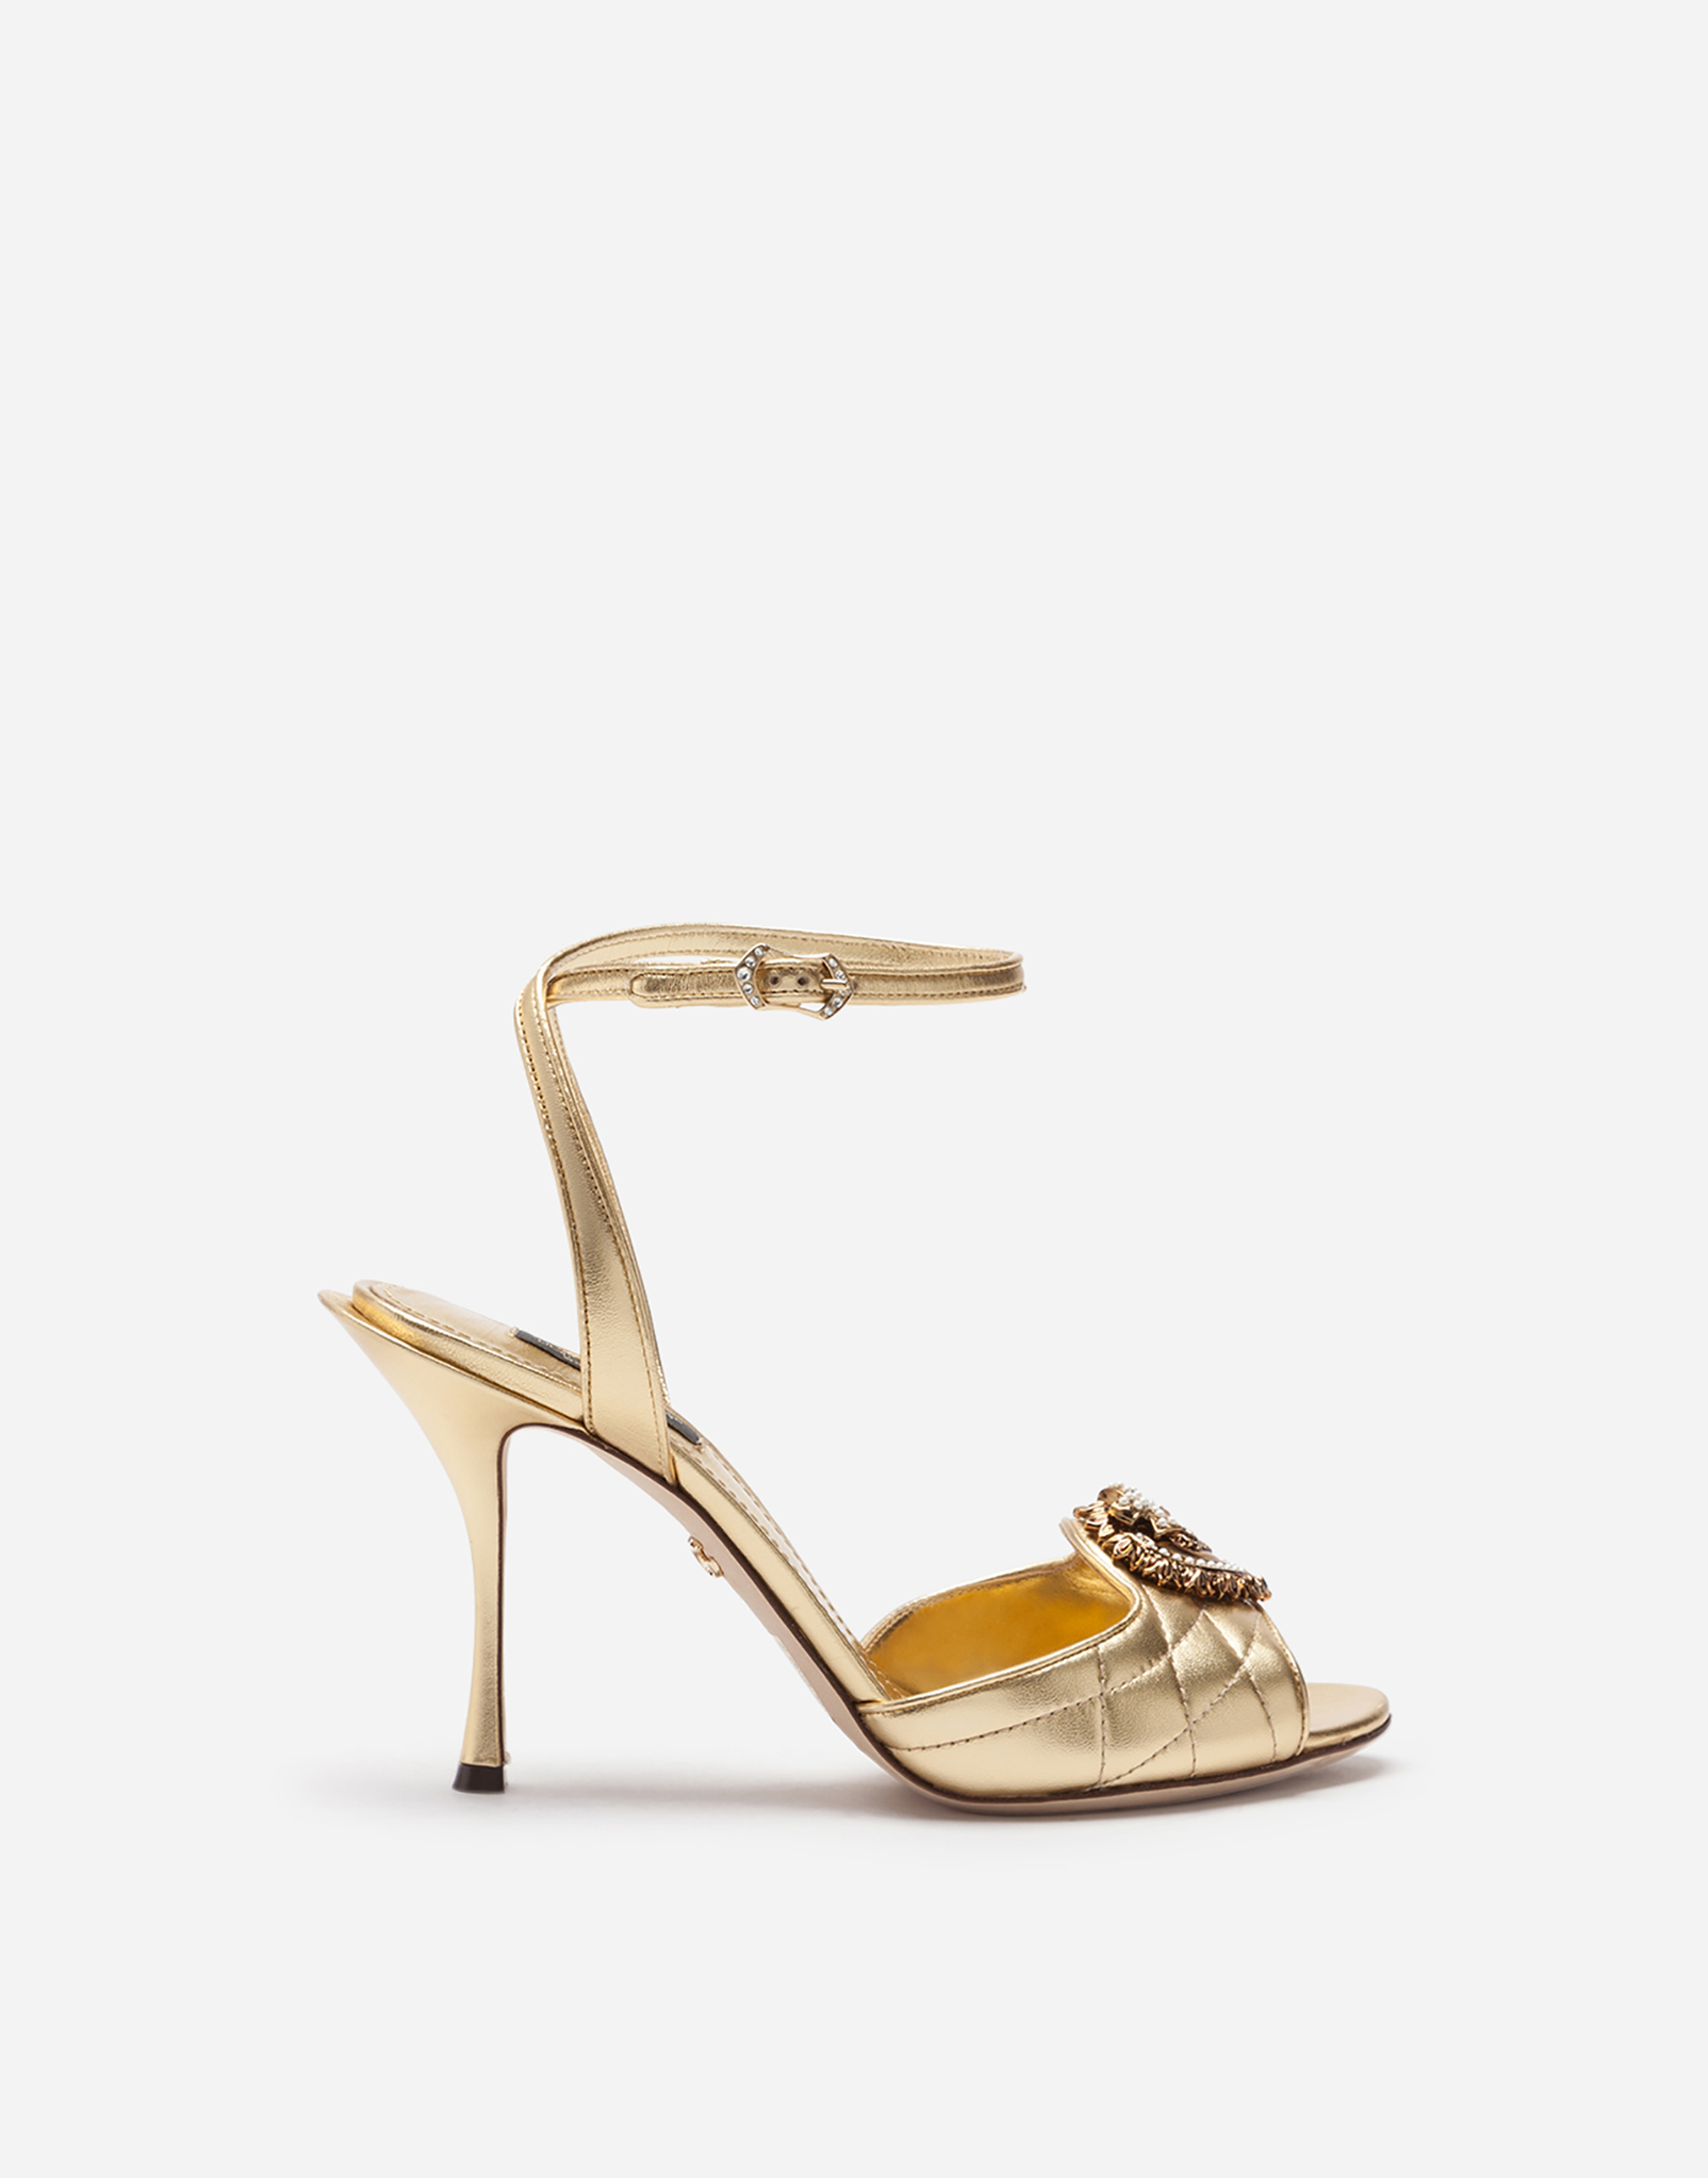 Quilted nappa mordore Devotion sandals in Gold